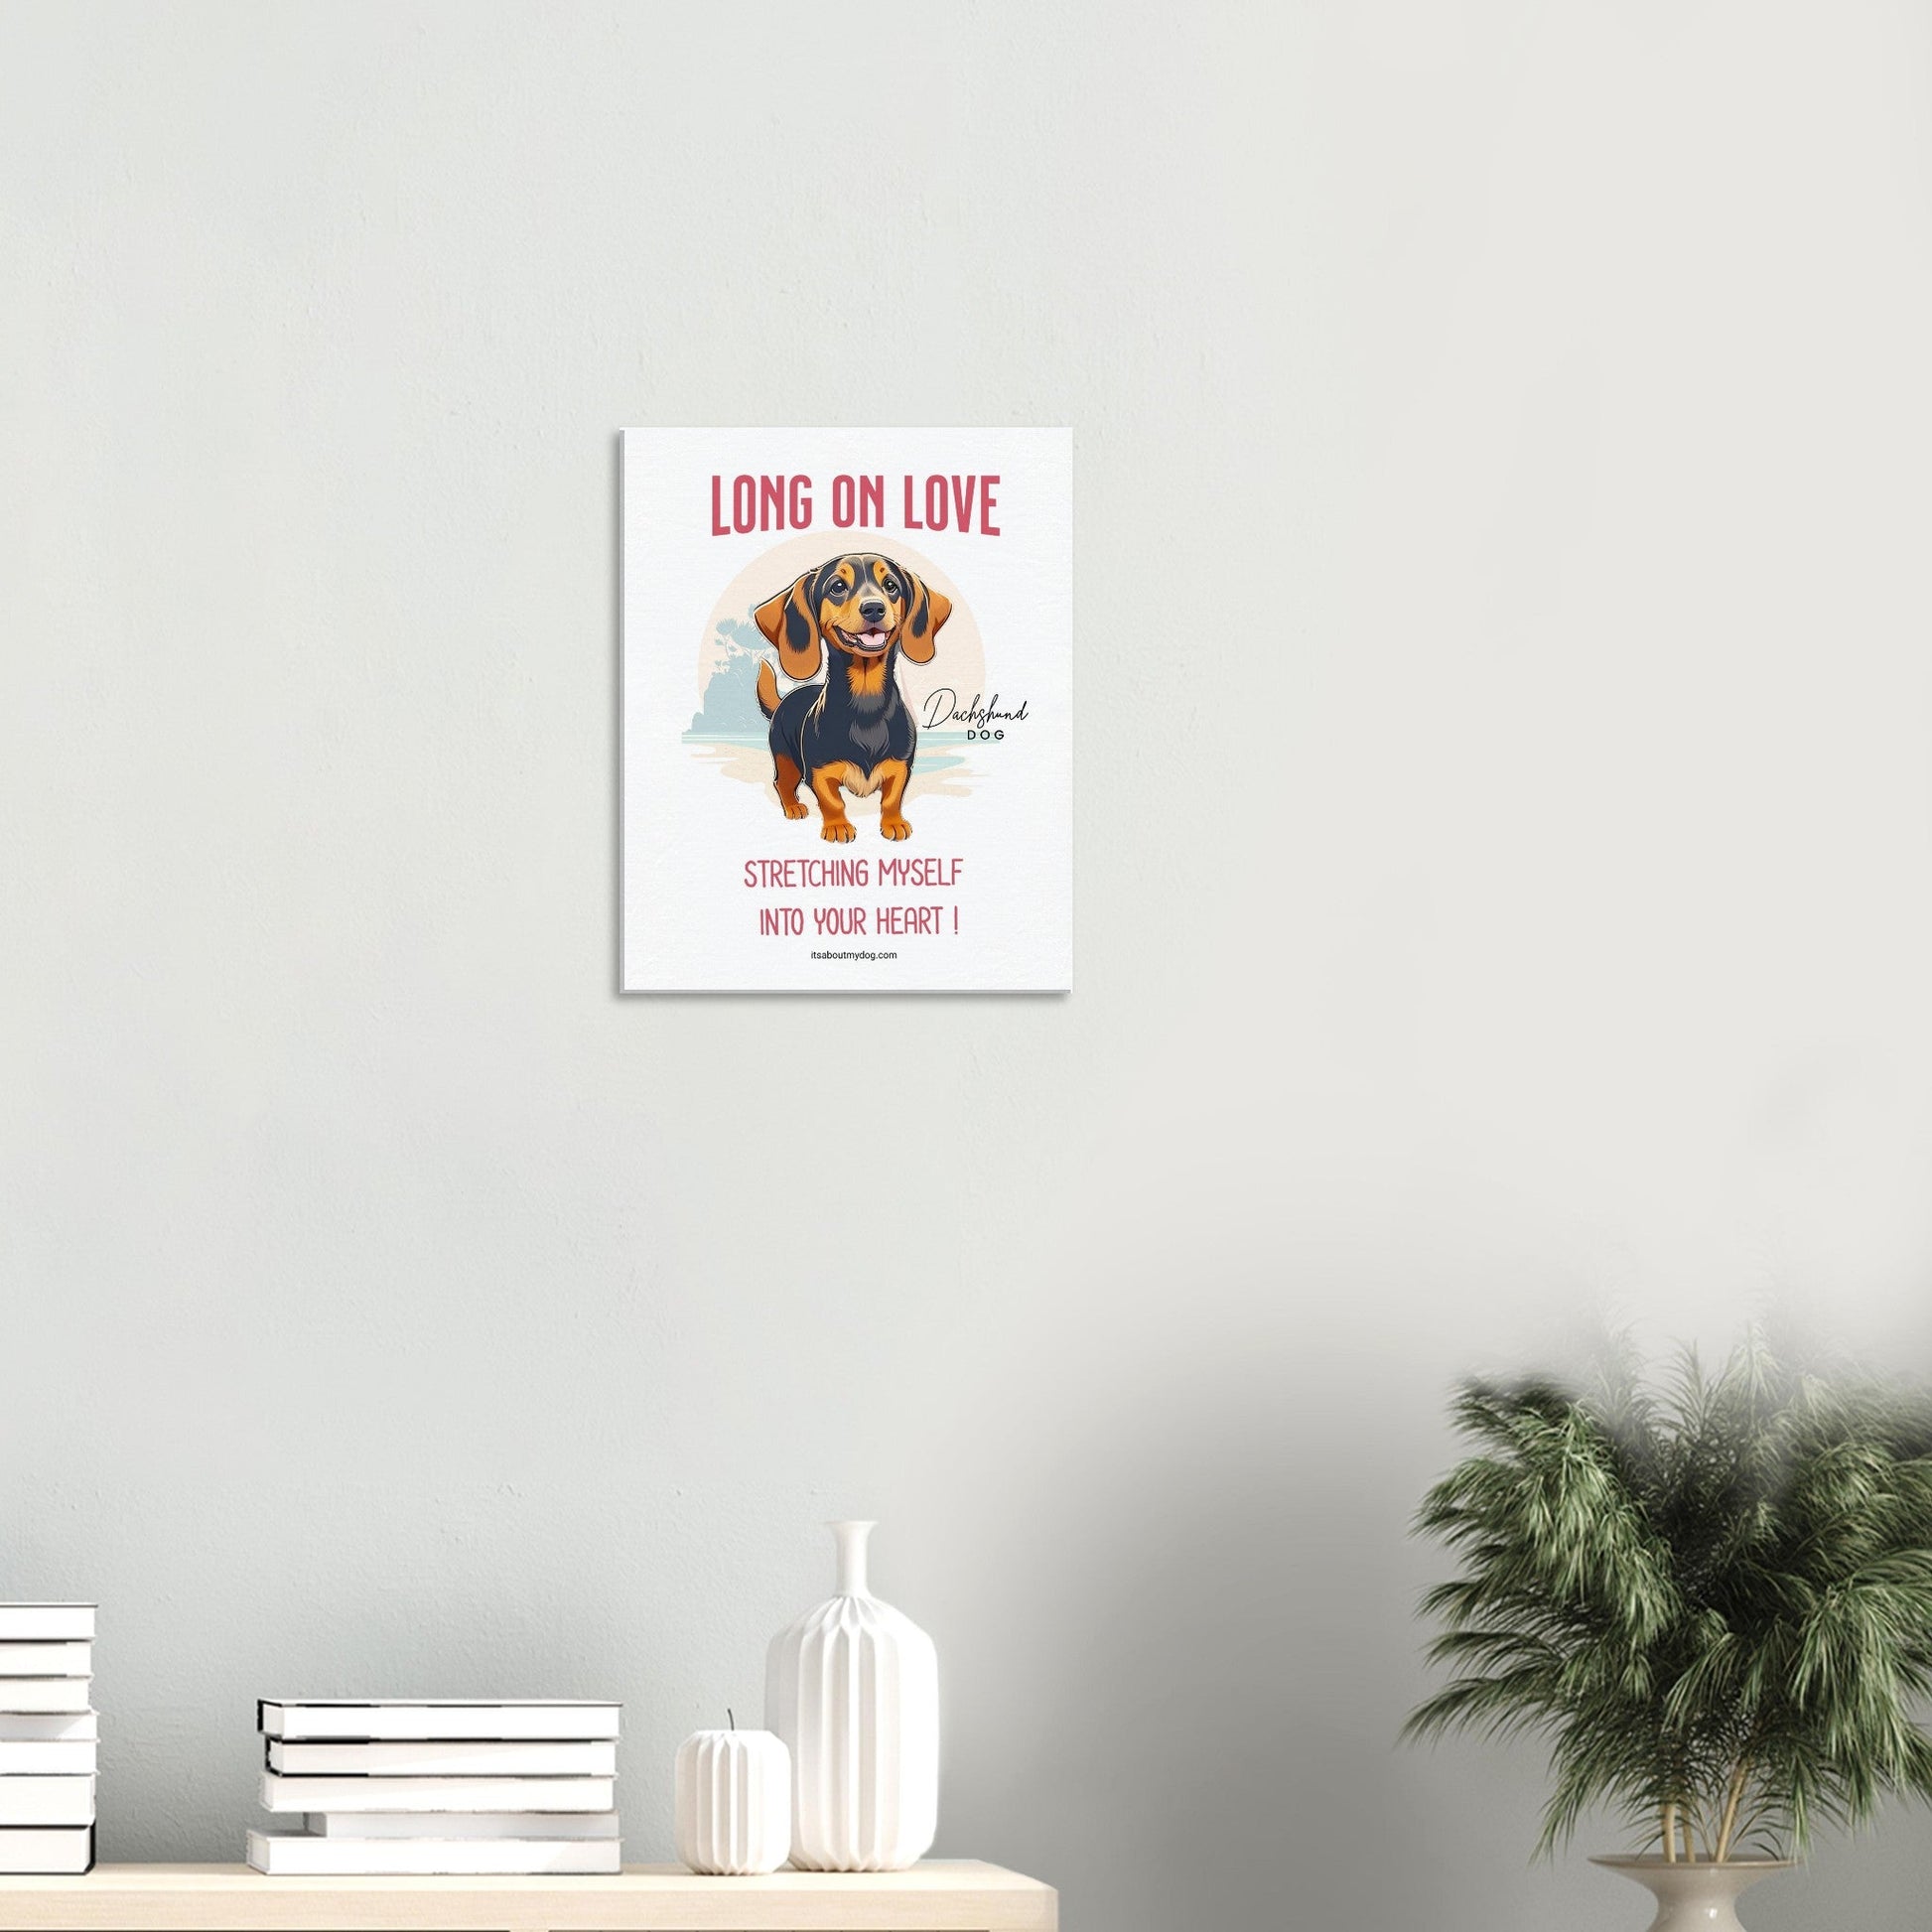 Dachshund Canvas, Sausage Dog Gift, Dachshund wall decor59.99-(FREE Delivery) Shop now at itsaboutmydog.com, Dachshund Custom Art, dachshund dog gifts, Dachshund Dog Mom, Dachshund Dog Print, dachshund gift, Dachshund gift ideas, Dachshund Jewelry, dachshund mom, dachshund puppies, dachshund wall decor, dachshund wall quote, dog canvas